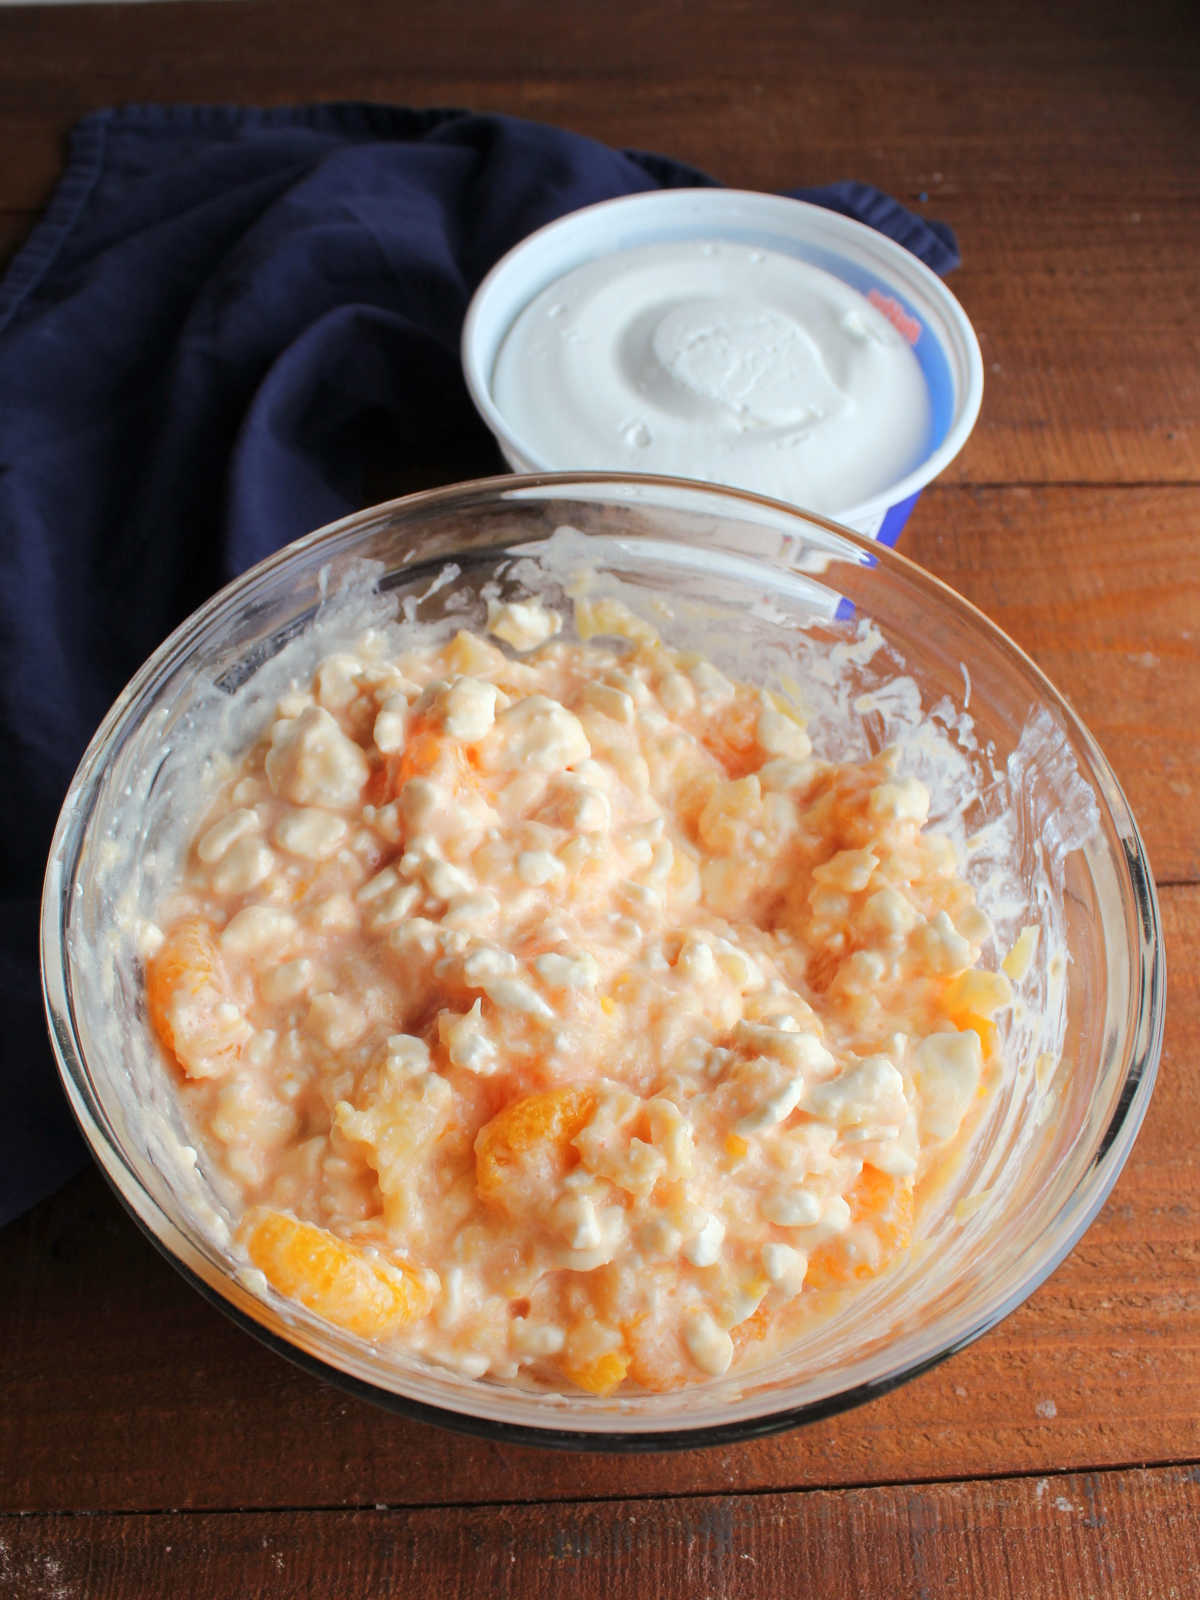 Drained cans of crushed pineapple and mandarin oranges stirred into the orange cottage cheese with a tub of whipped topping in the background. 